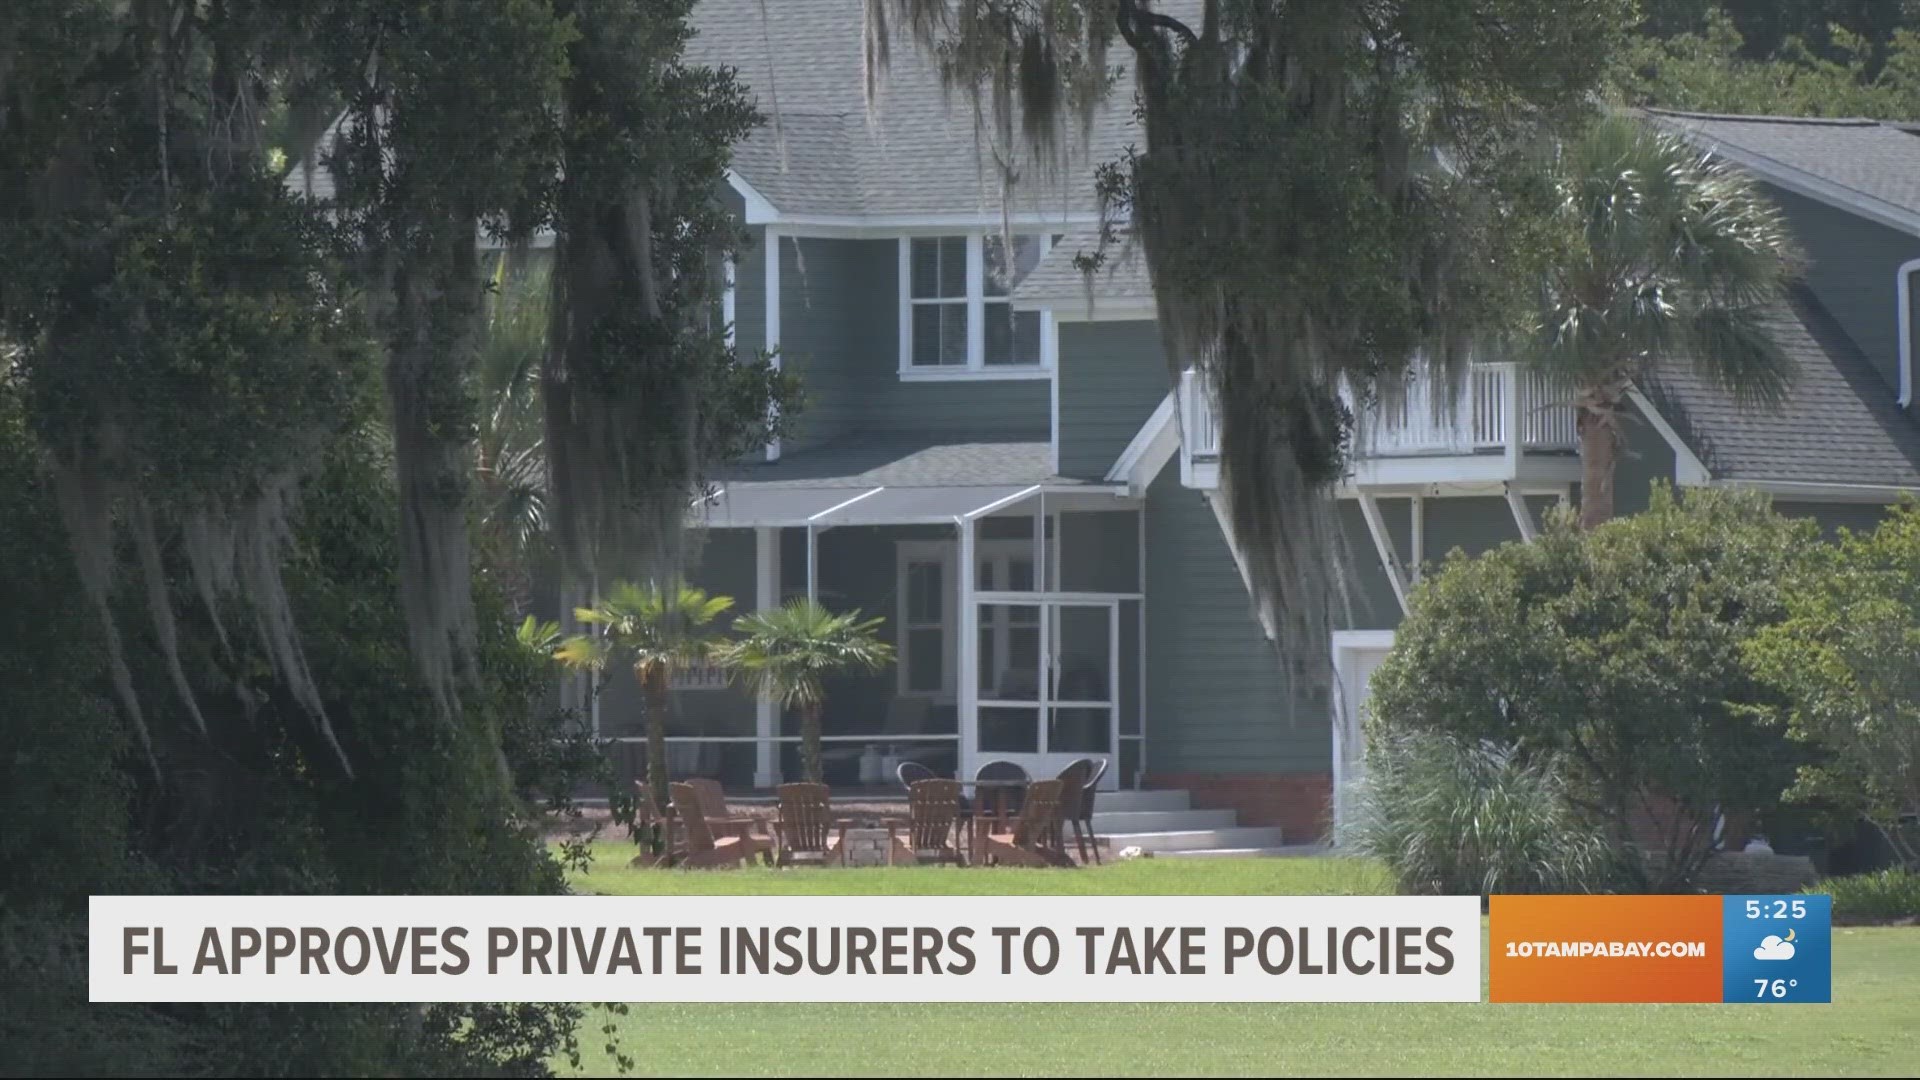 Last month, the state-backed insurer of last resort sent letters to more than 300K policyholders telling them they needed to switch coverage.